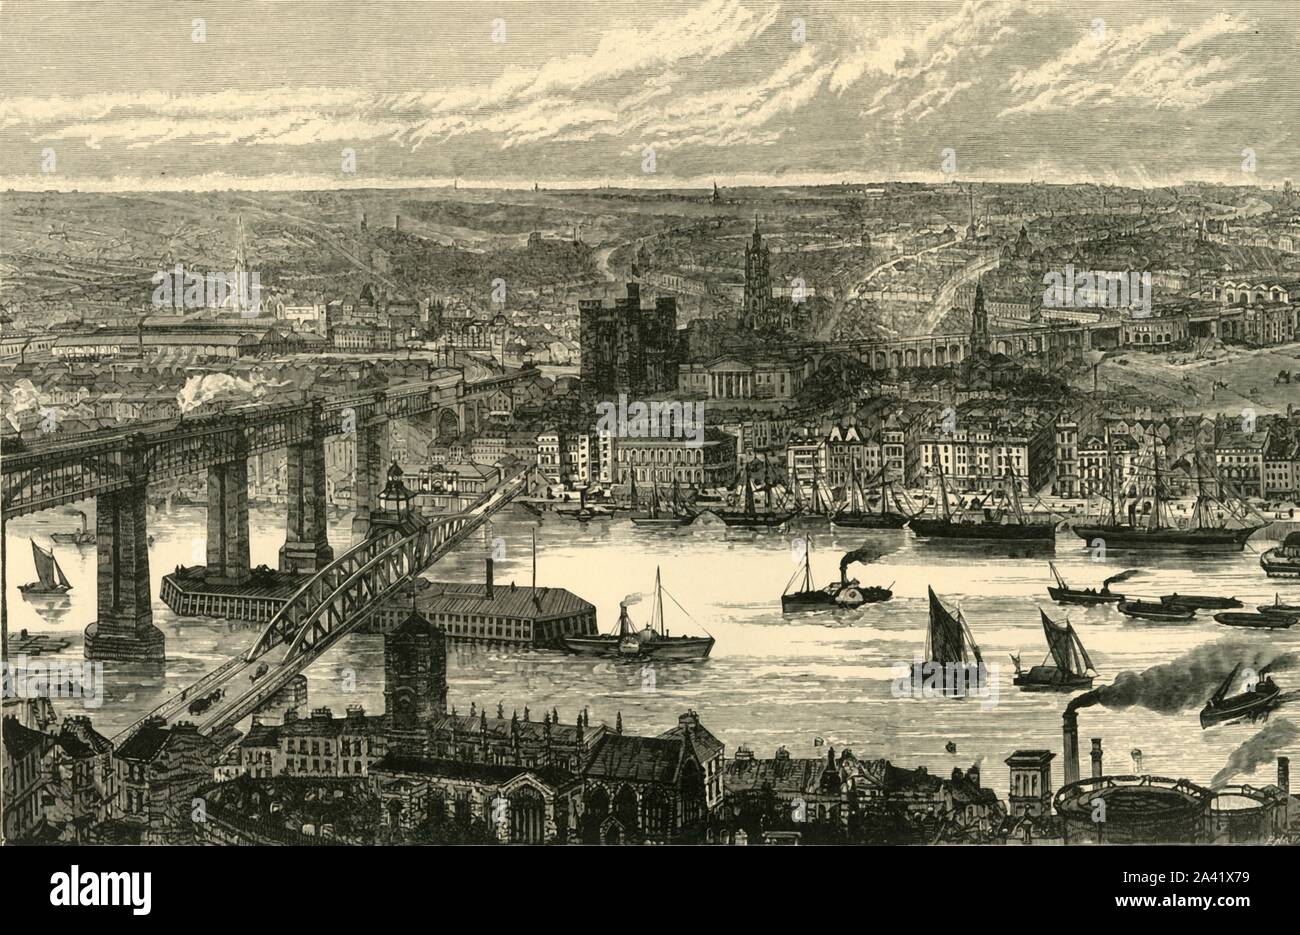 'Newcastle-On-Tyne', 1898. In the 19th century, shipbuilding and heavy engineering were central to the city which made significant contribution to the Industrial Revolution. From &quot;Our Own Country, Volume VI&quot;. [Cassell and Company, Limited, London, Paris &amp; Melbourne, 1898] Stock Photo